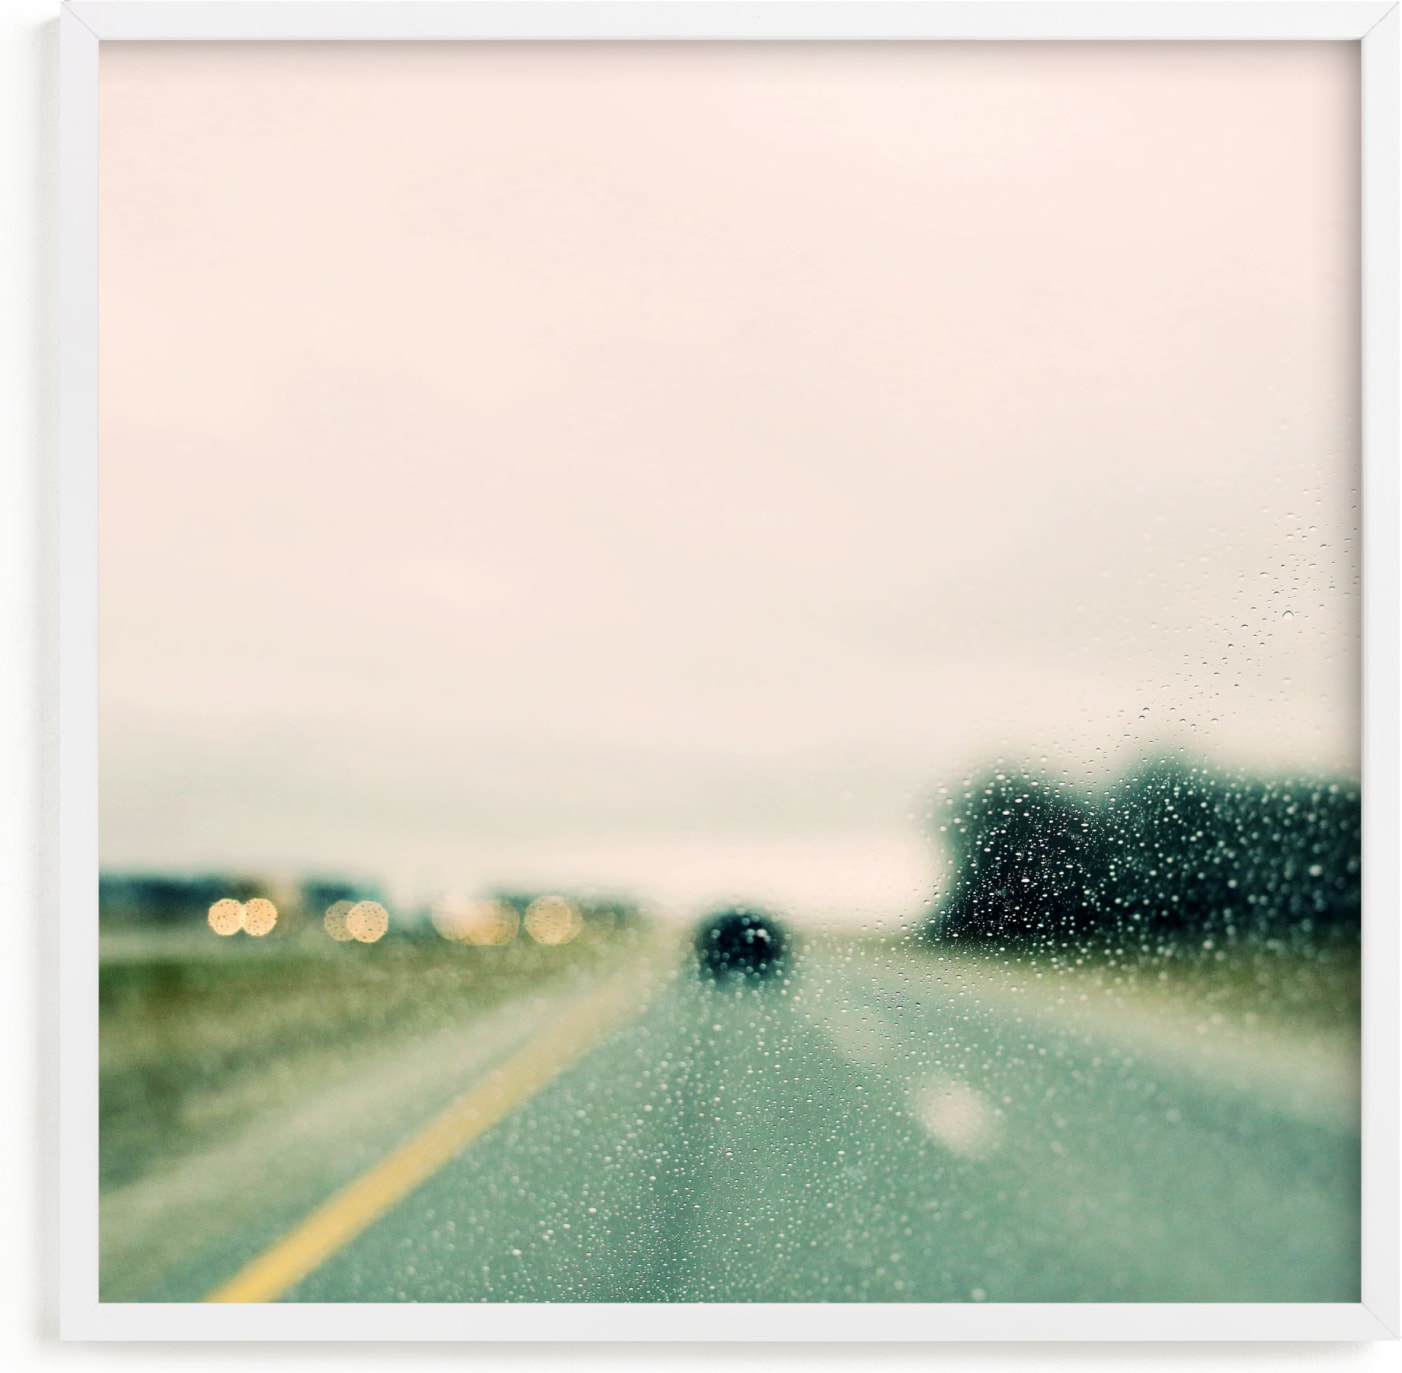 This is a blue art by ALICIA BOCK called Road and Rain #2.